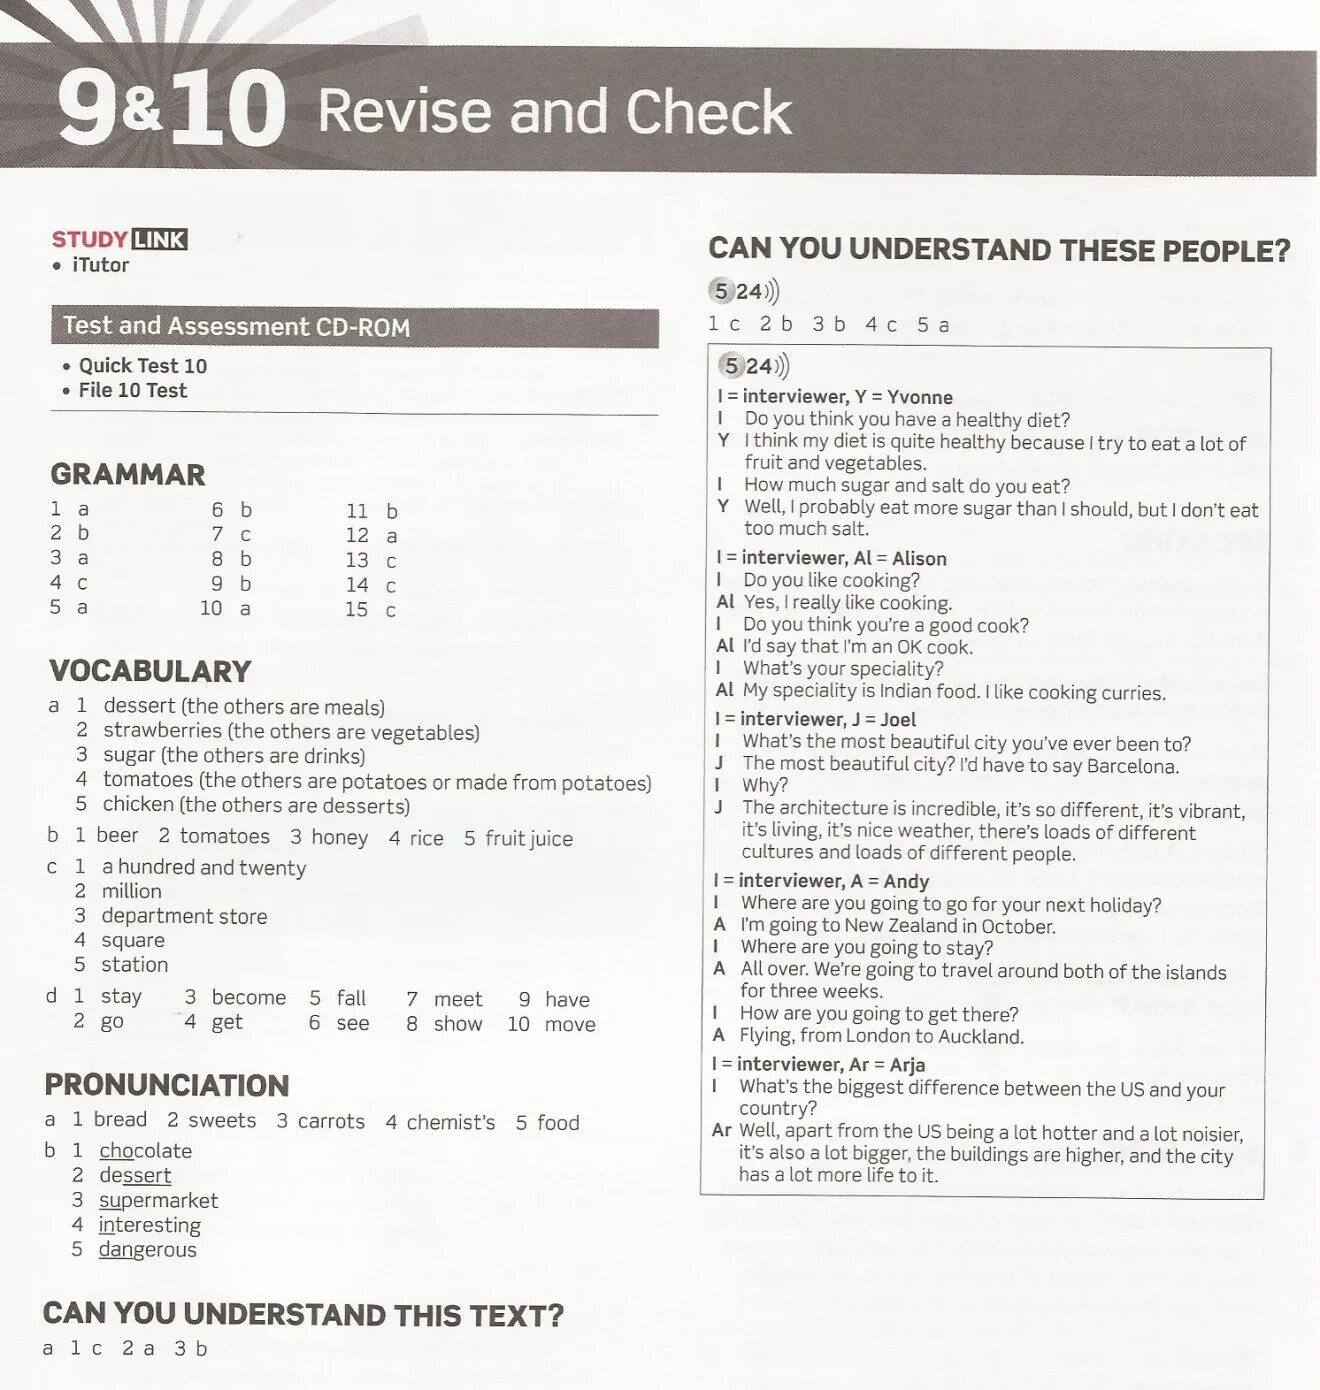 Check english vocabulary. Revise and check 1 2 ответы Elementary. Revise and check 9 10 pre-Intermediate English file answers. Revise and check 1 2 pre Intermediate. Revise and check 9 10 pre Intermediate Key.